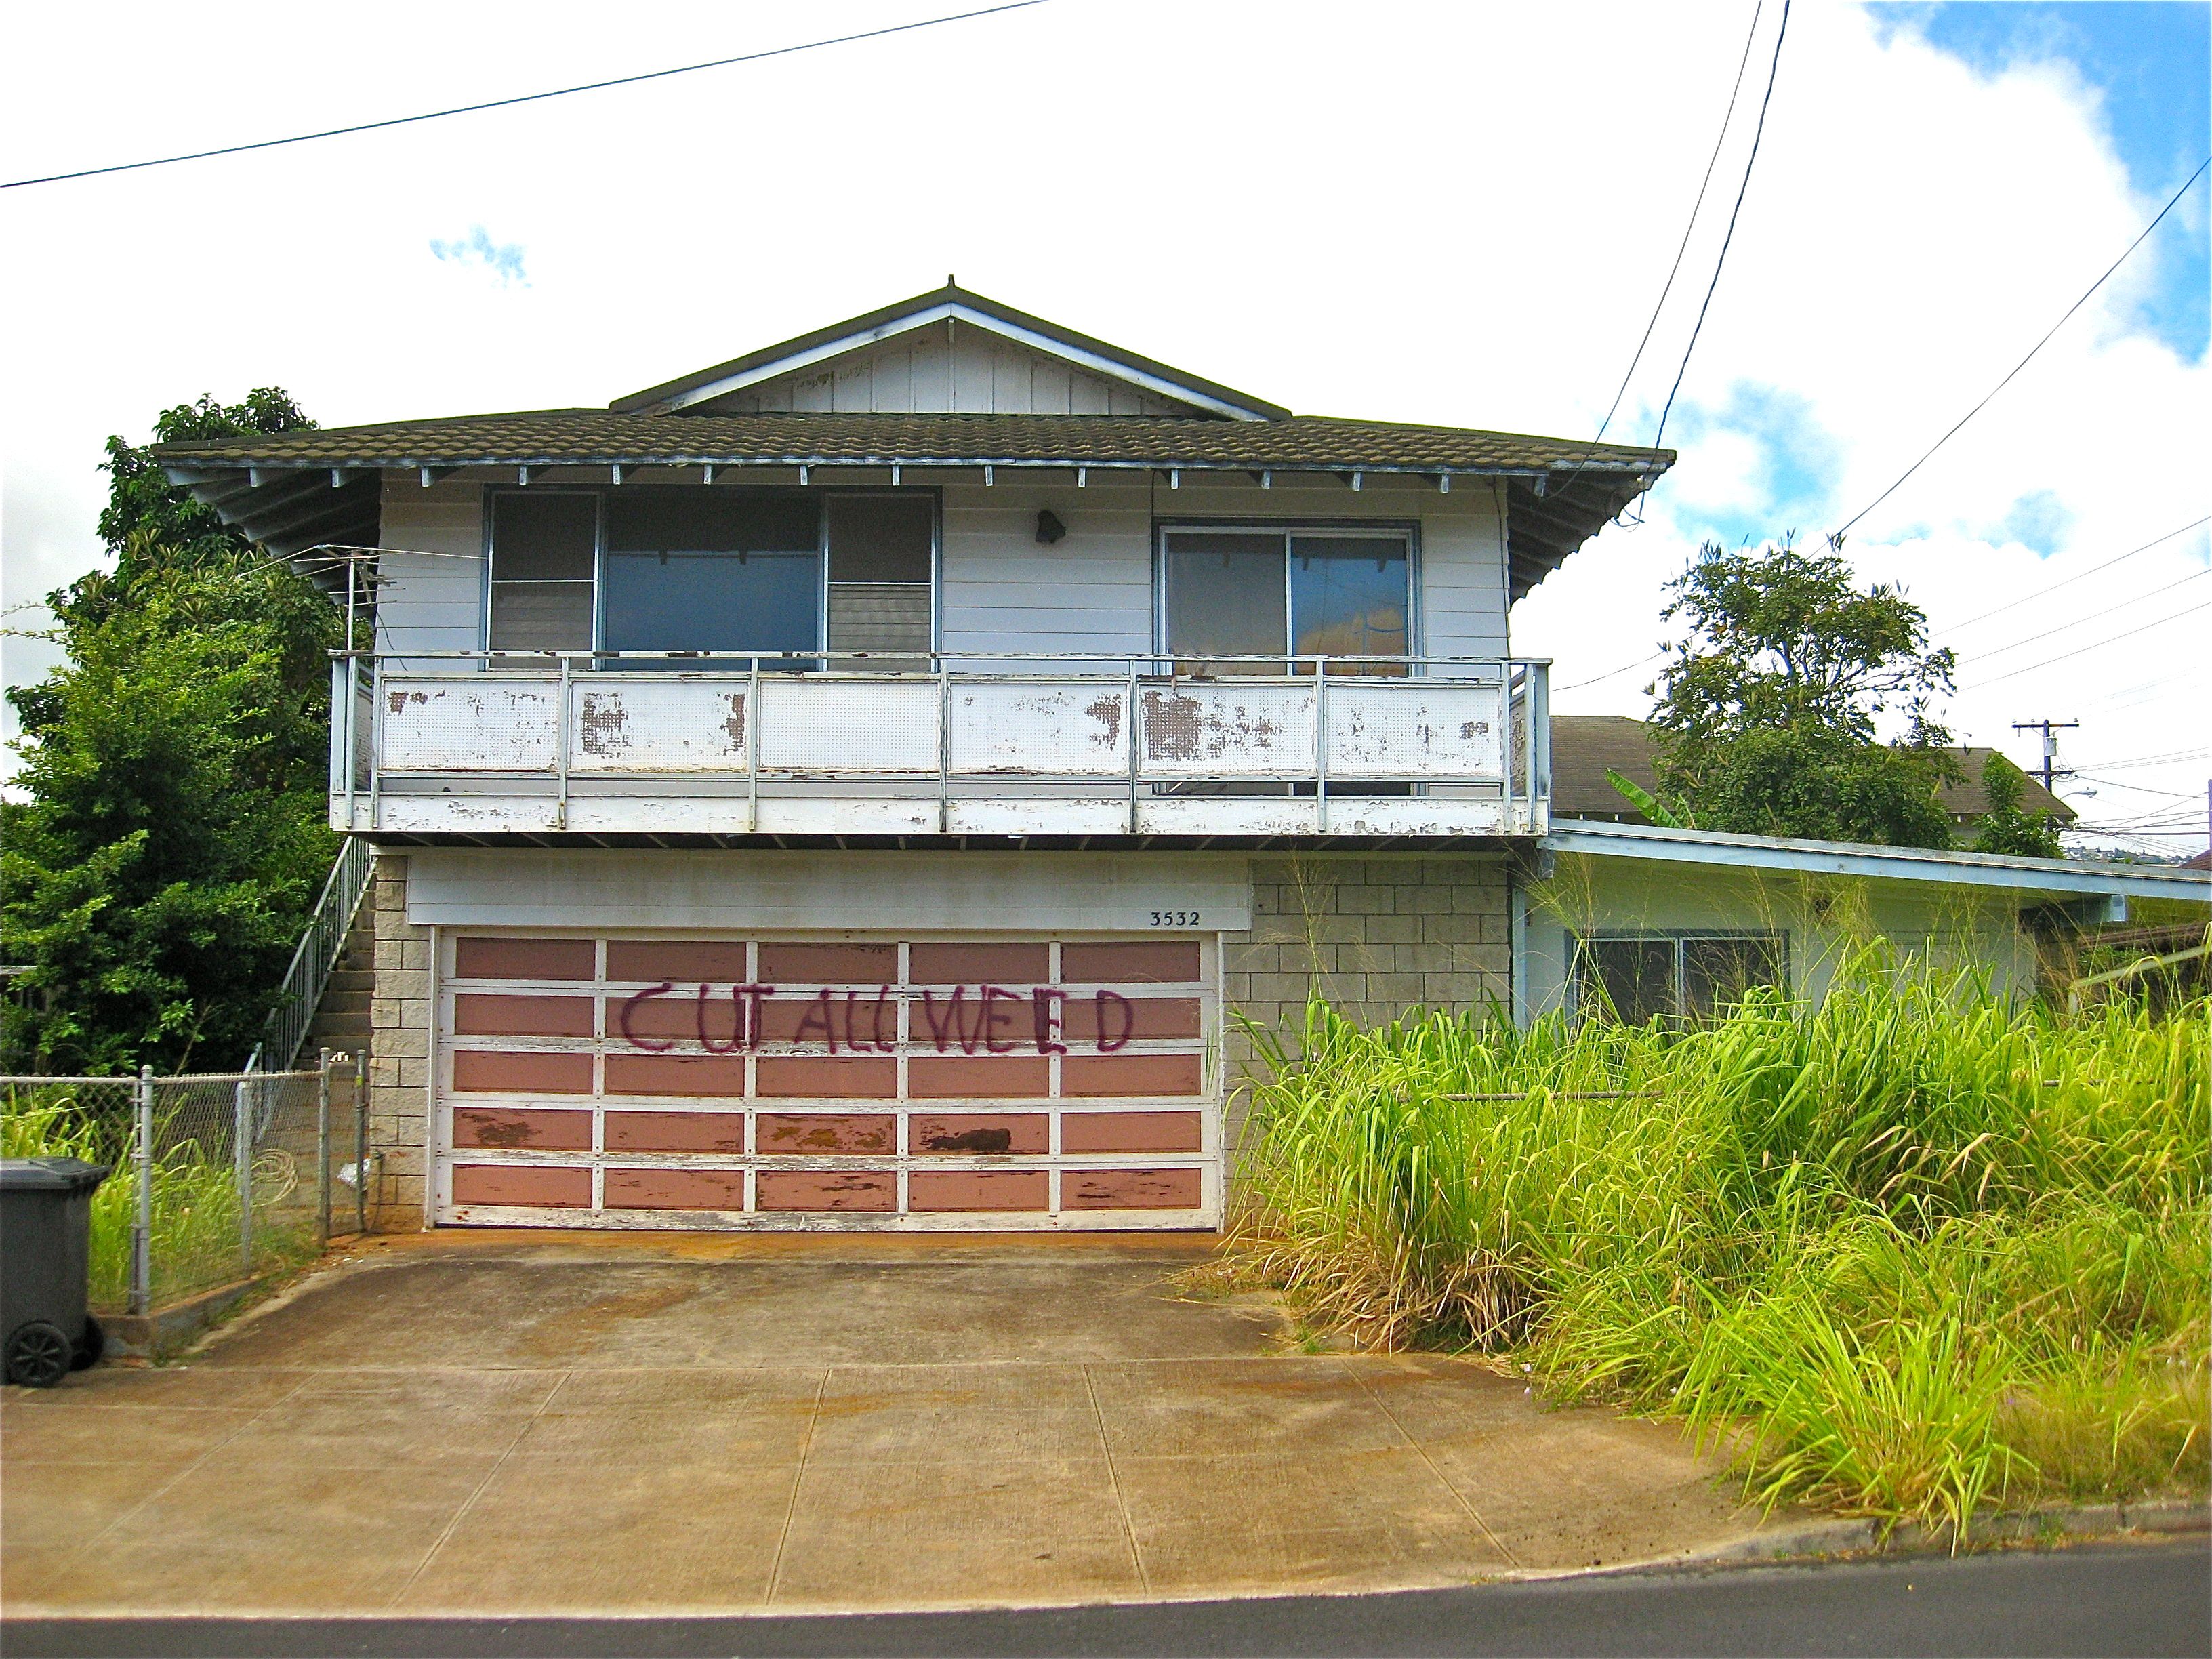 Who can buy property in Hawaii?